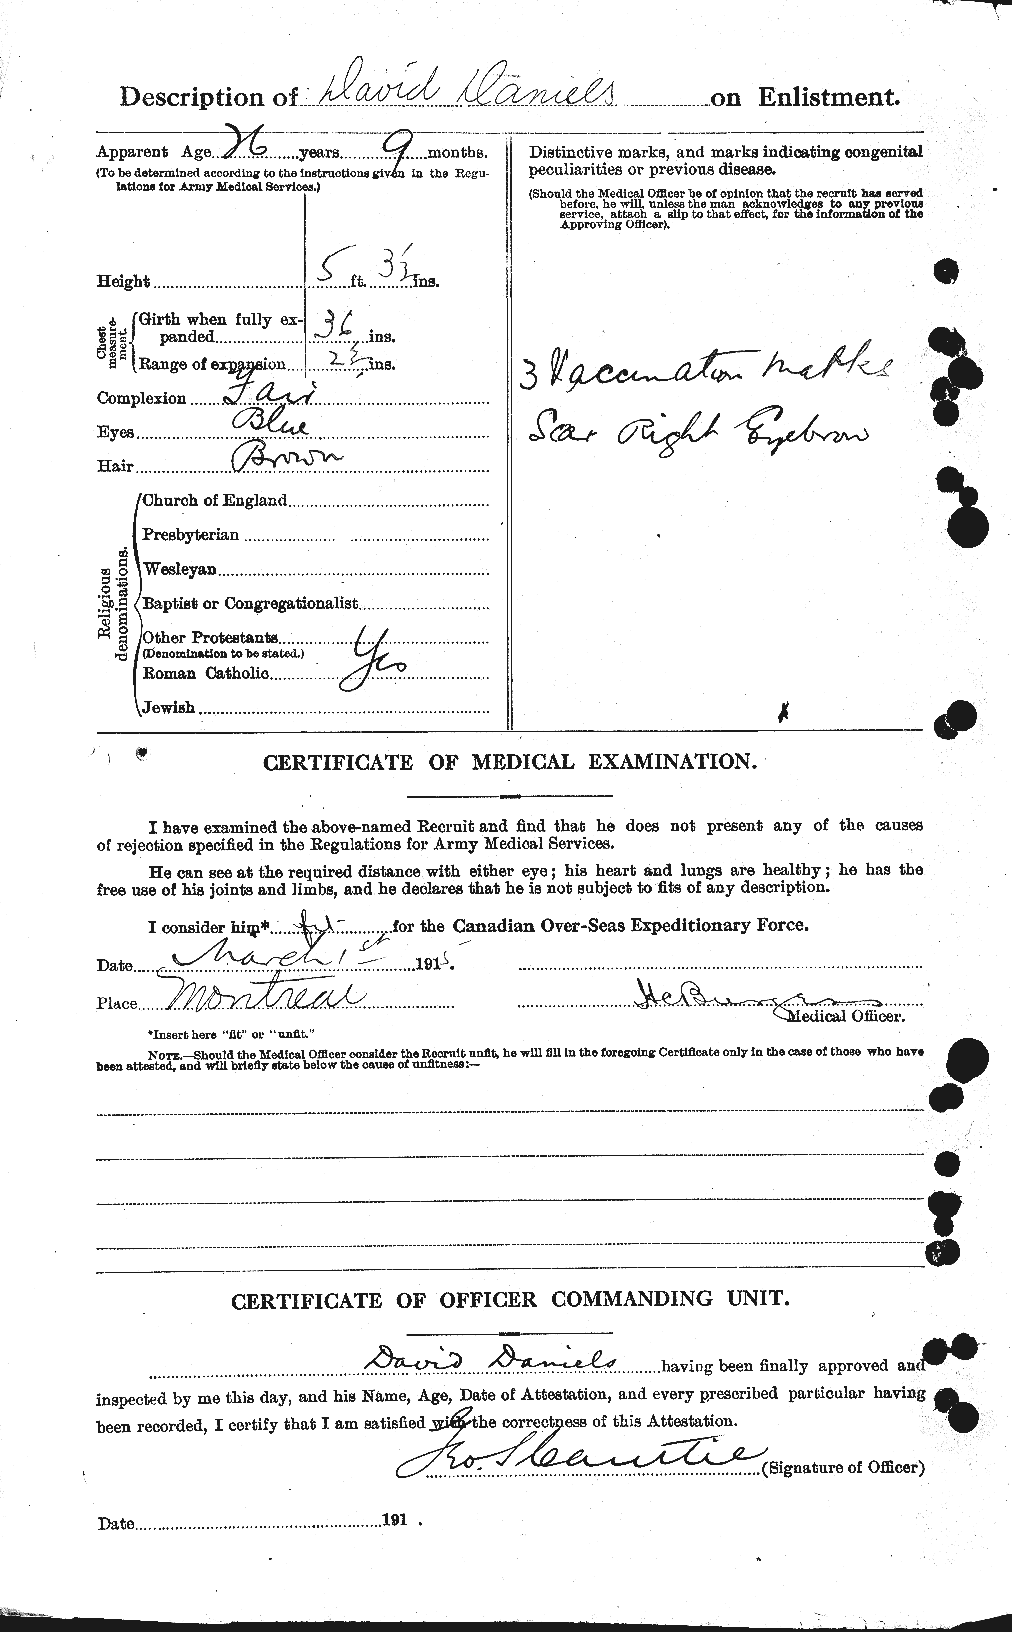 Personnel Records of the First World War - CEF 279577b